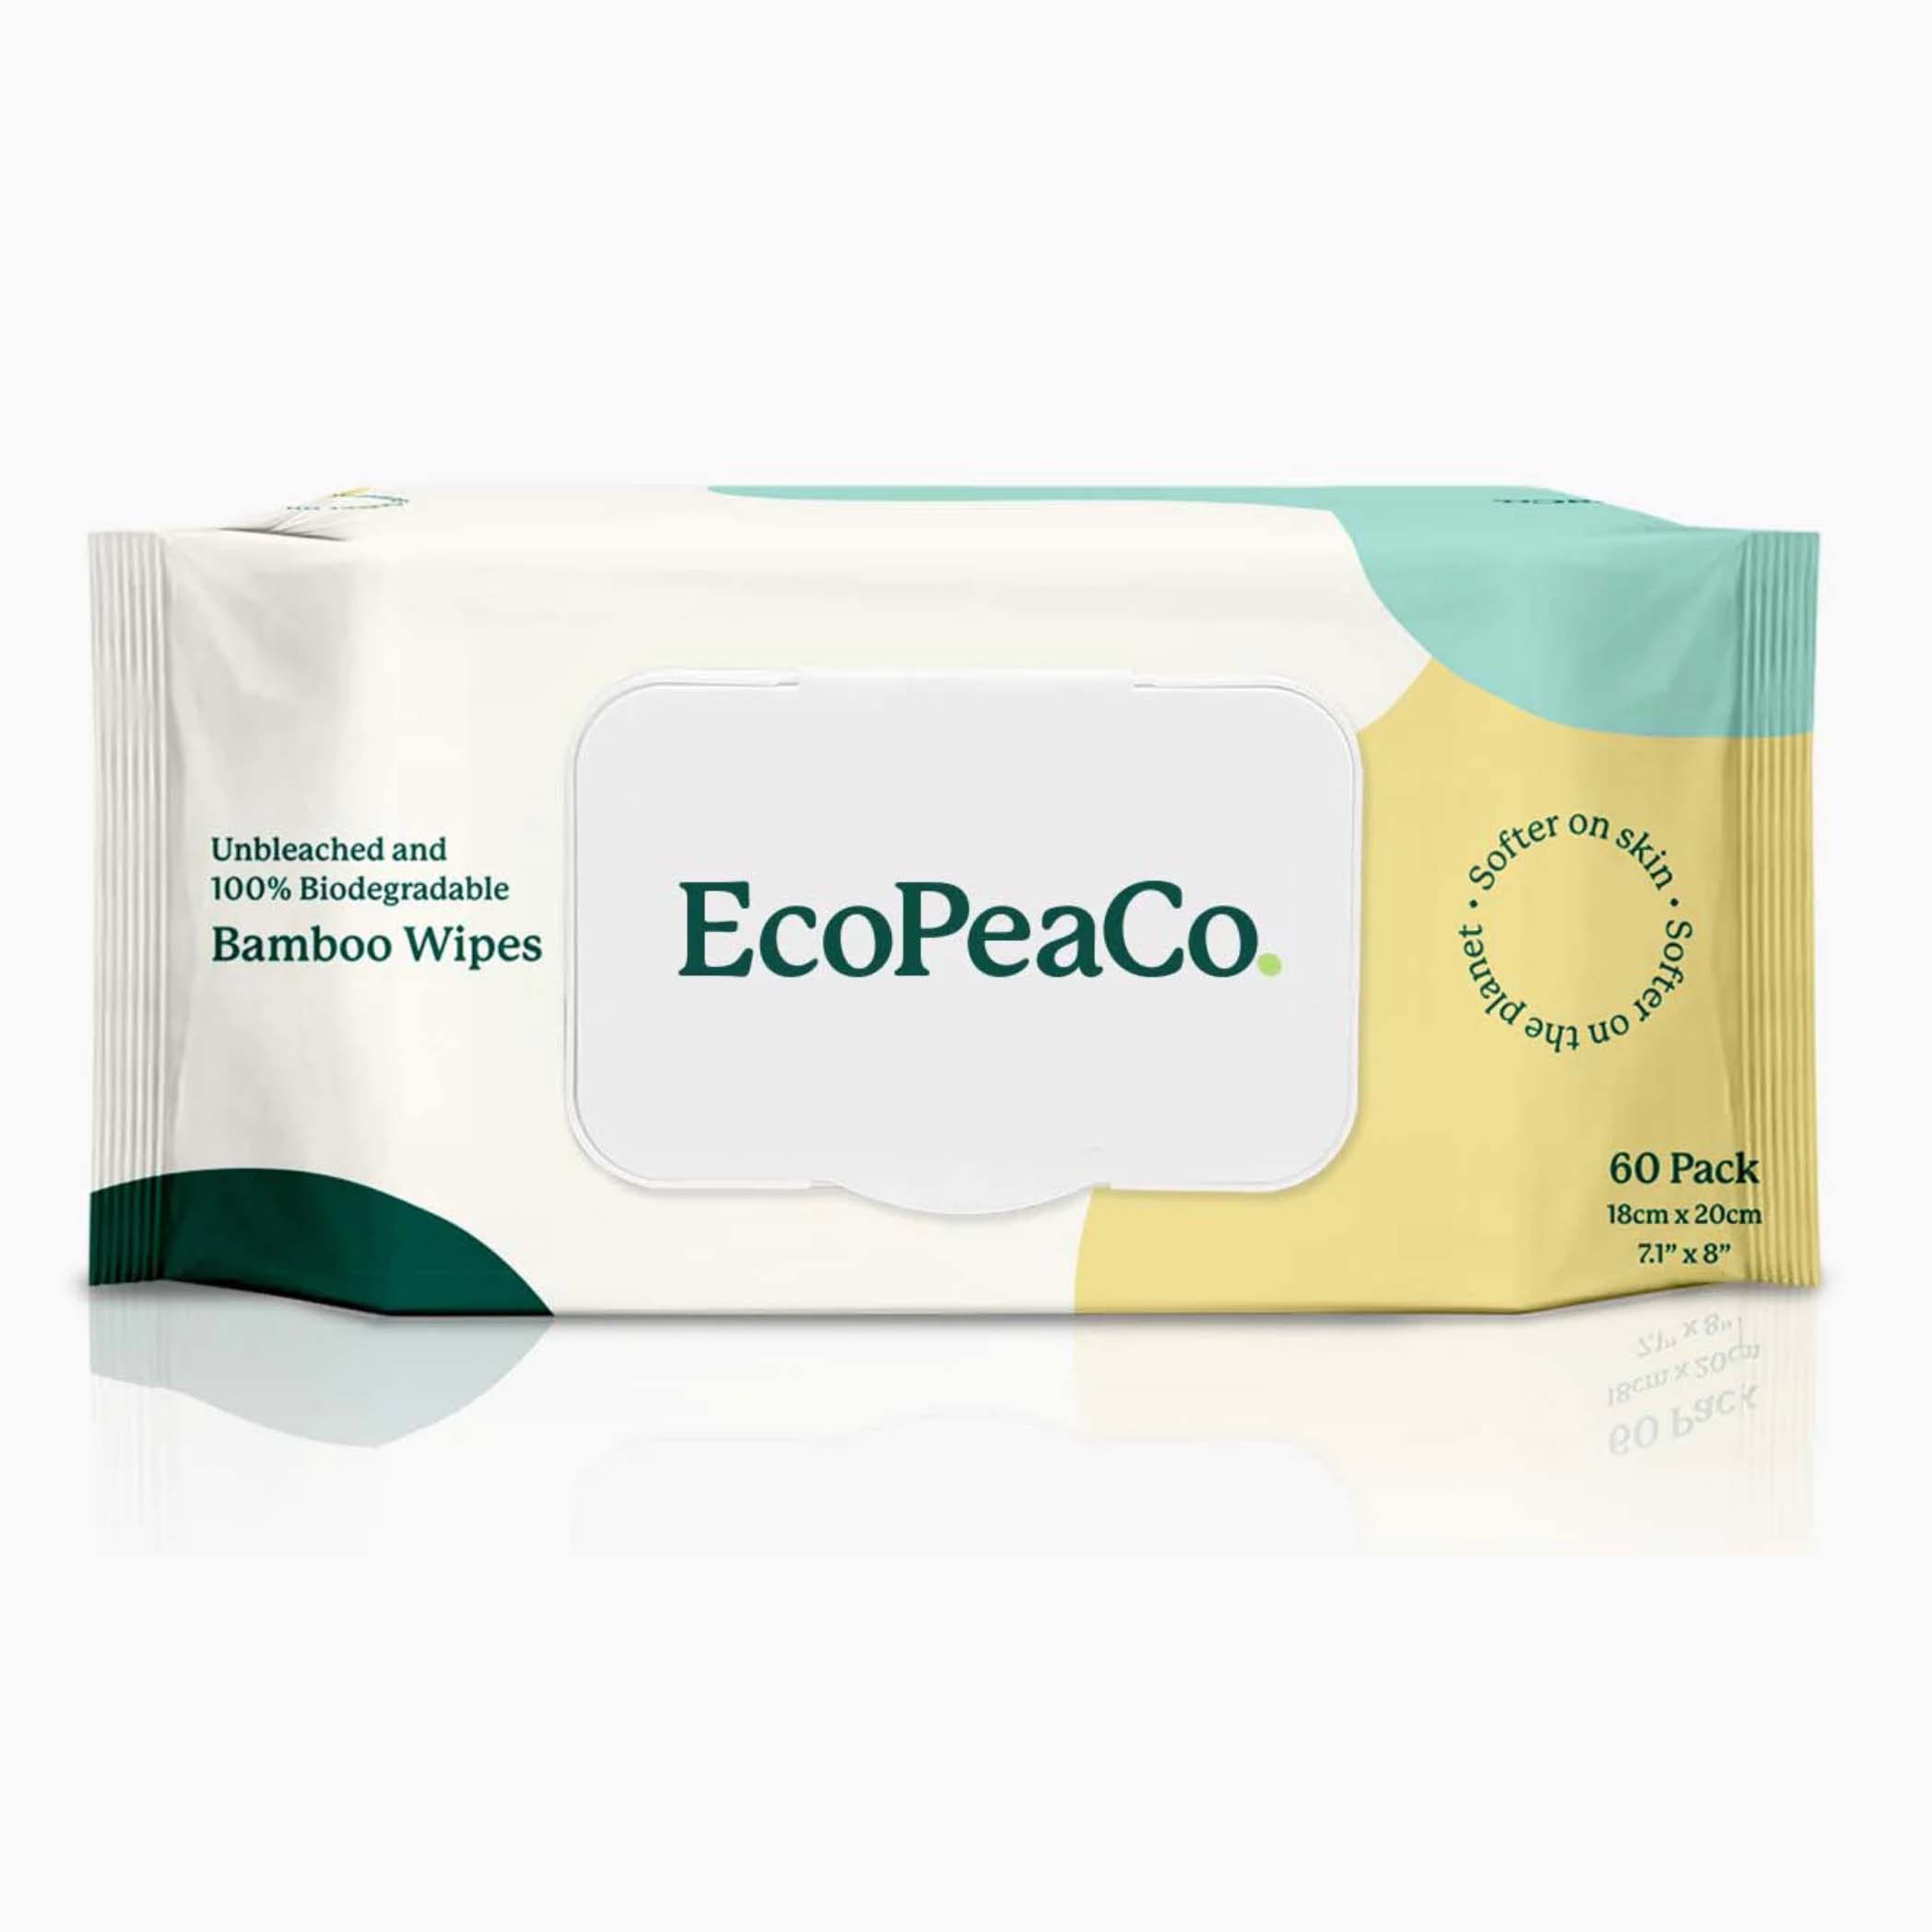 Ecopea co baby wipes in colourful packaging